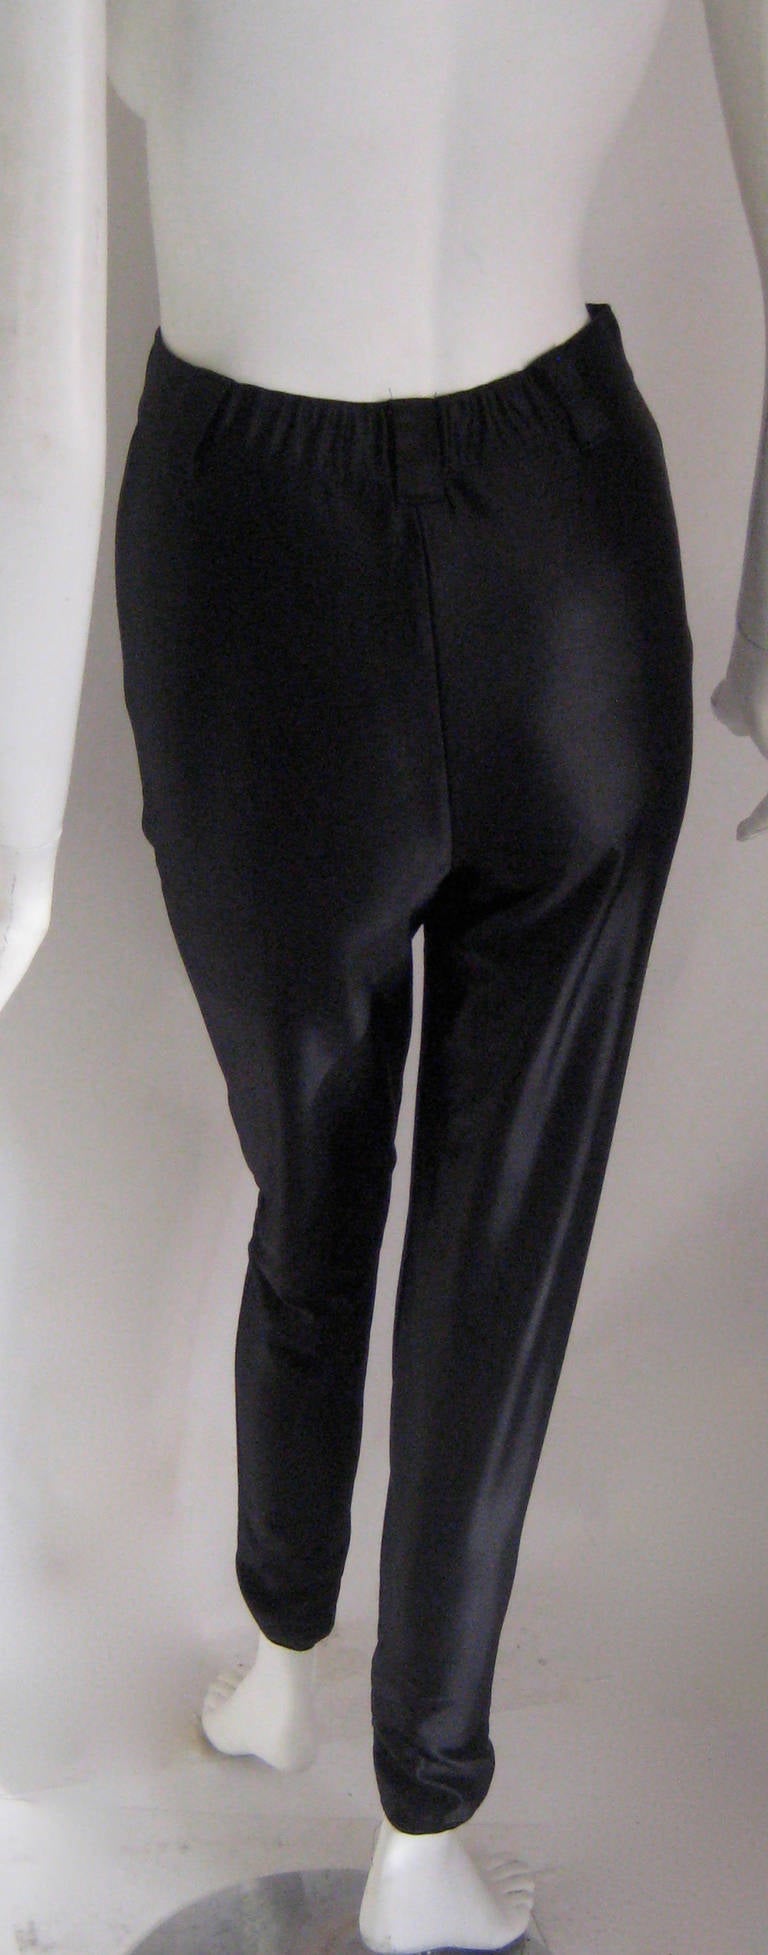 Kansai Yamamoto Punk Rock Disco Pants In Excellent Condition For Sale In Chicago, IL